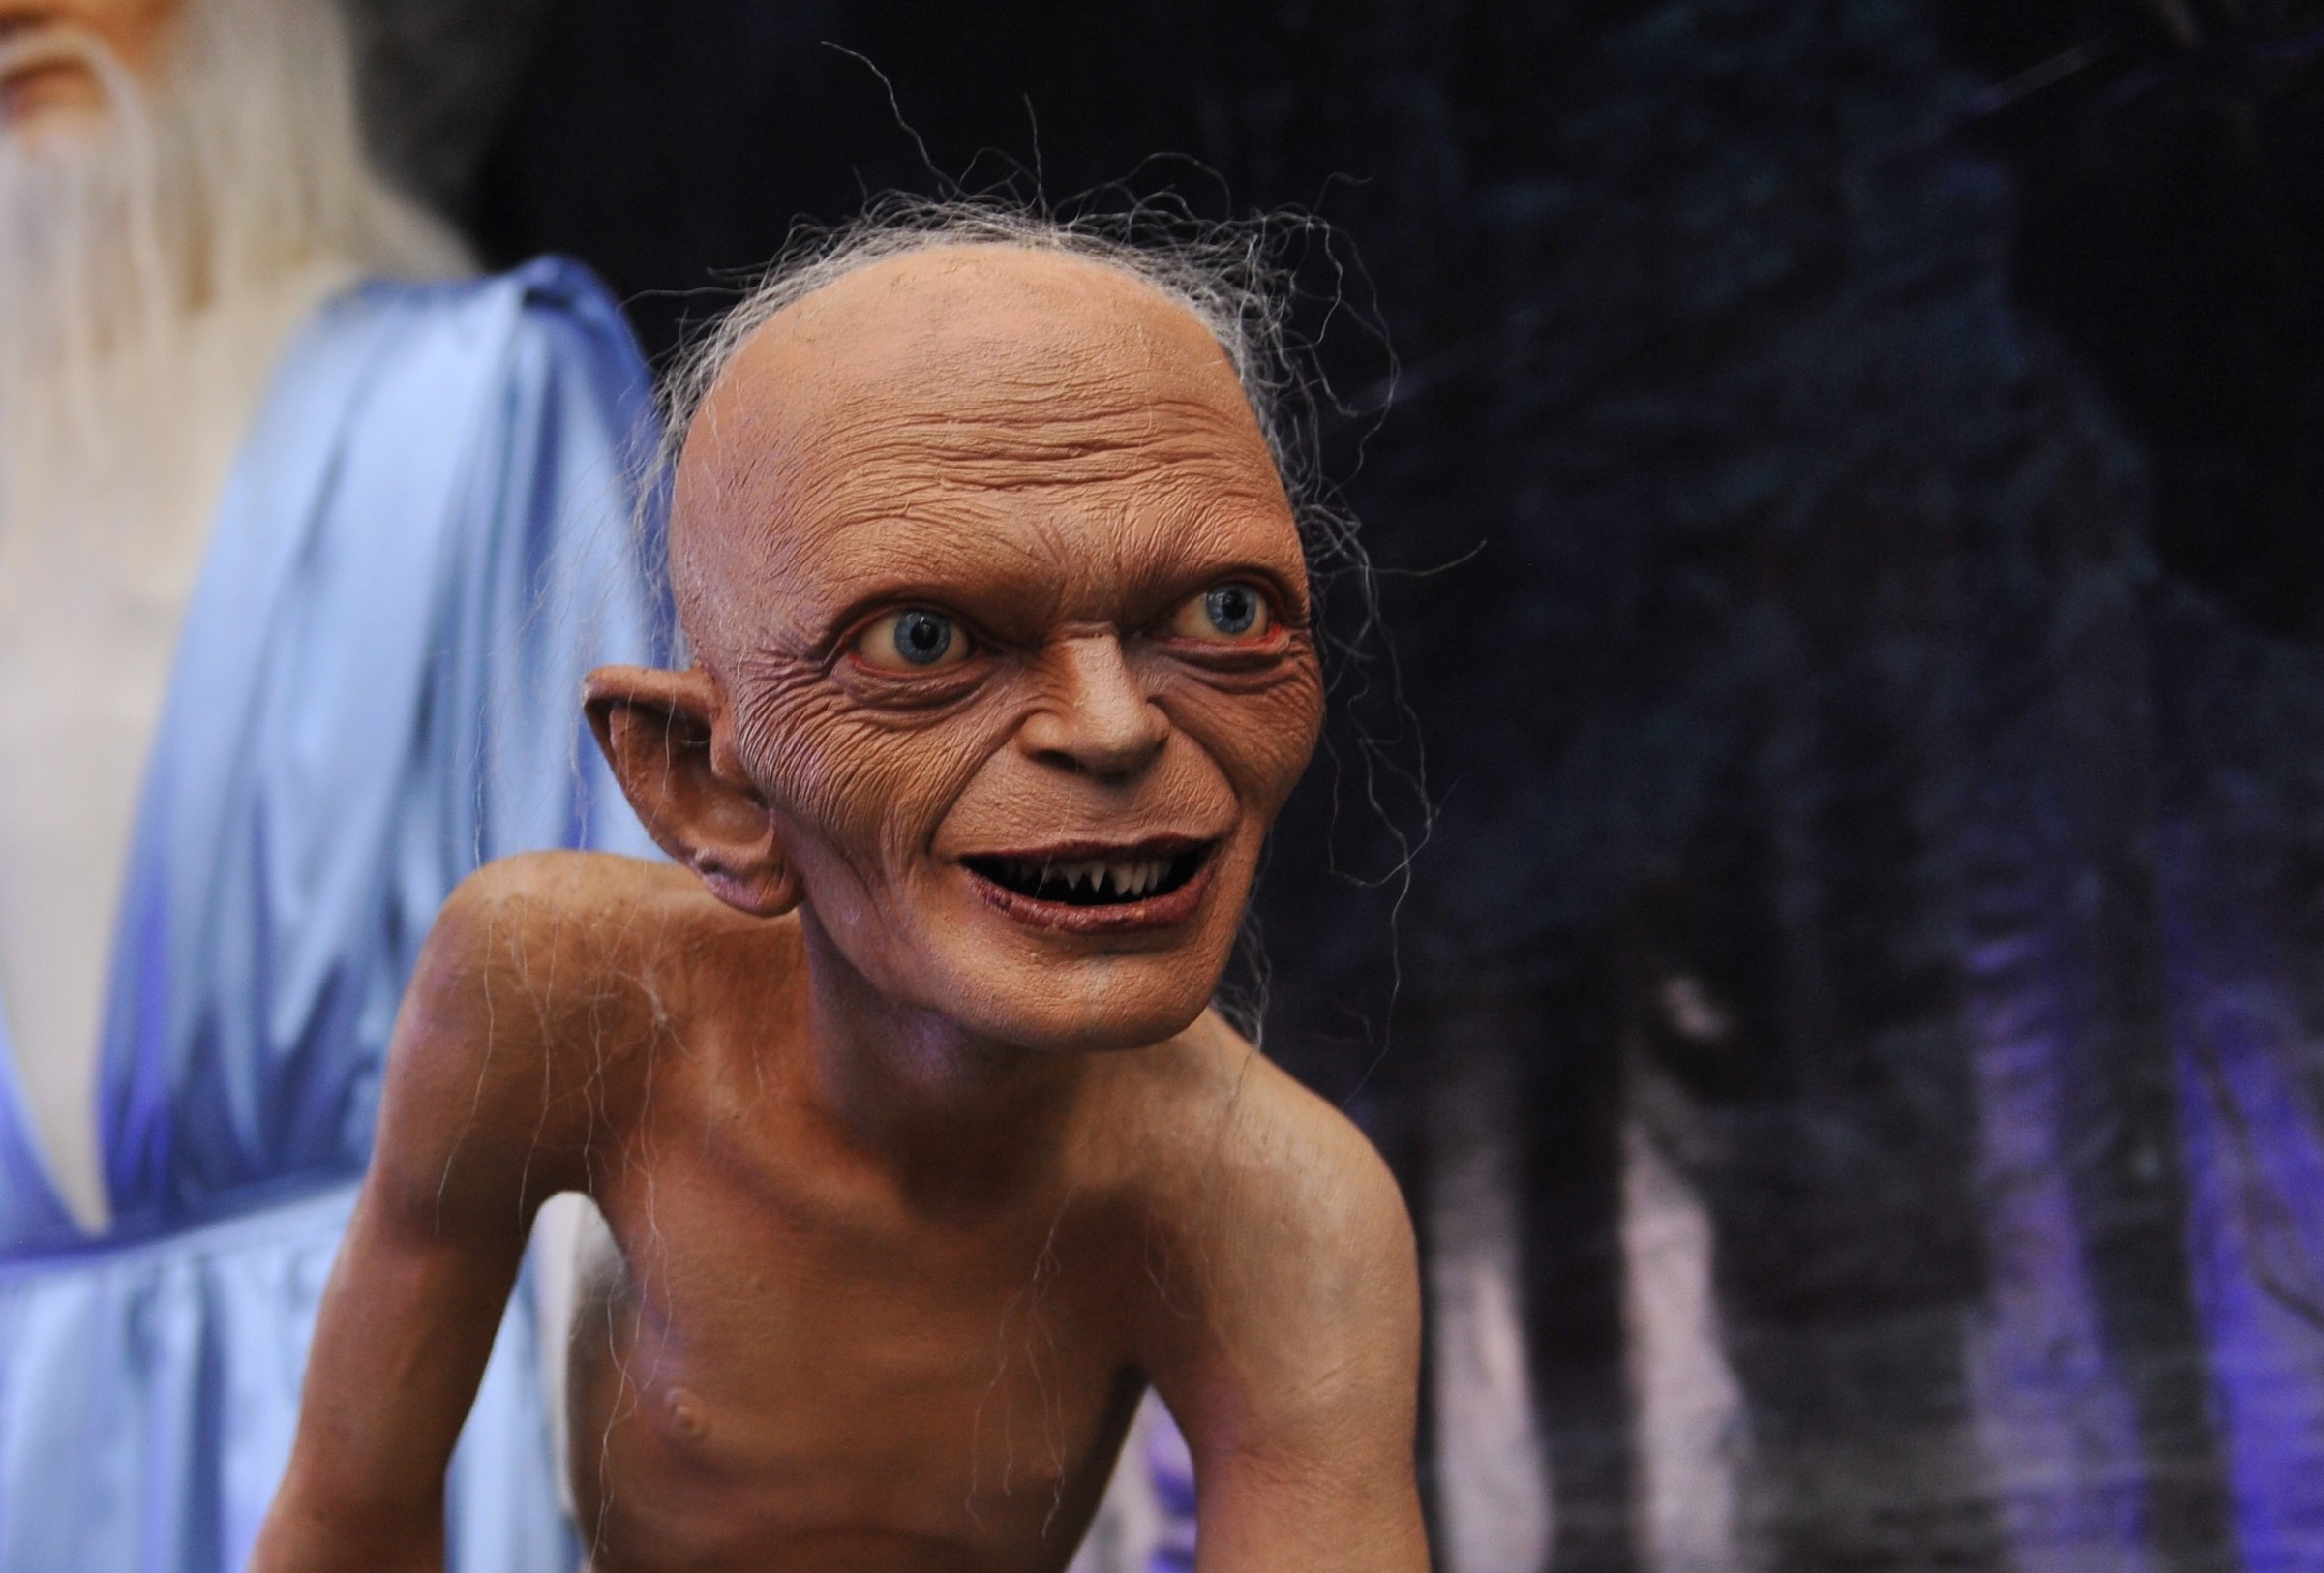 Warner Bros. reveals upcoming ‘Lord of the Rings’ film focusing on Gollum. #UnfinishedBusiness